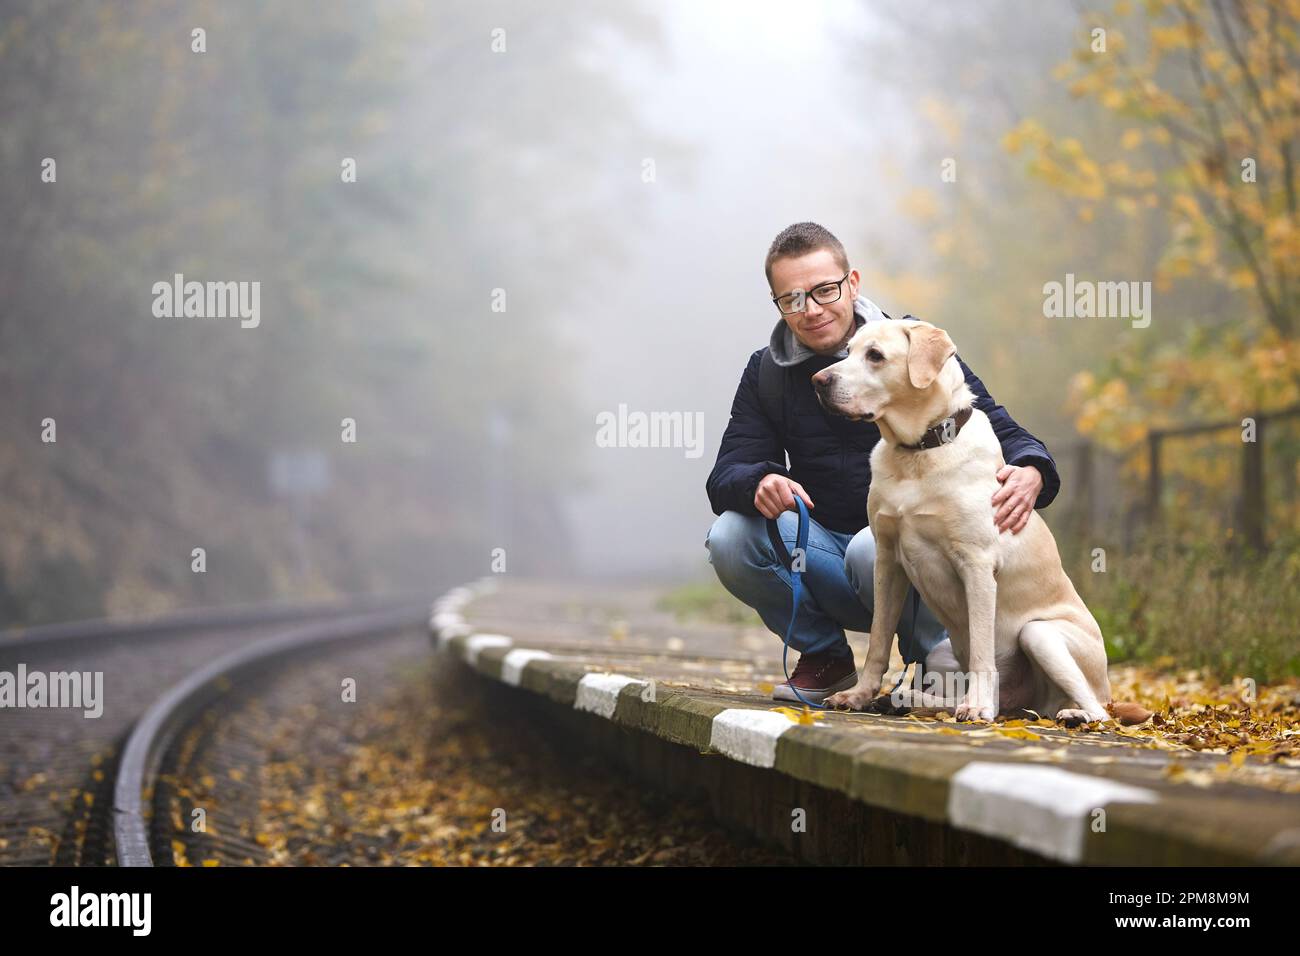 Man with dog on leash are waiting on platform of railway station. Pet owner and his labrador retriever together during trip by train. Stock Photo